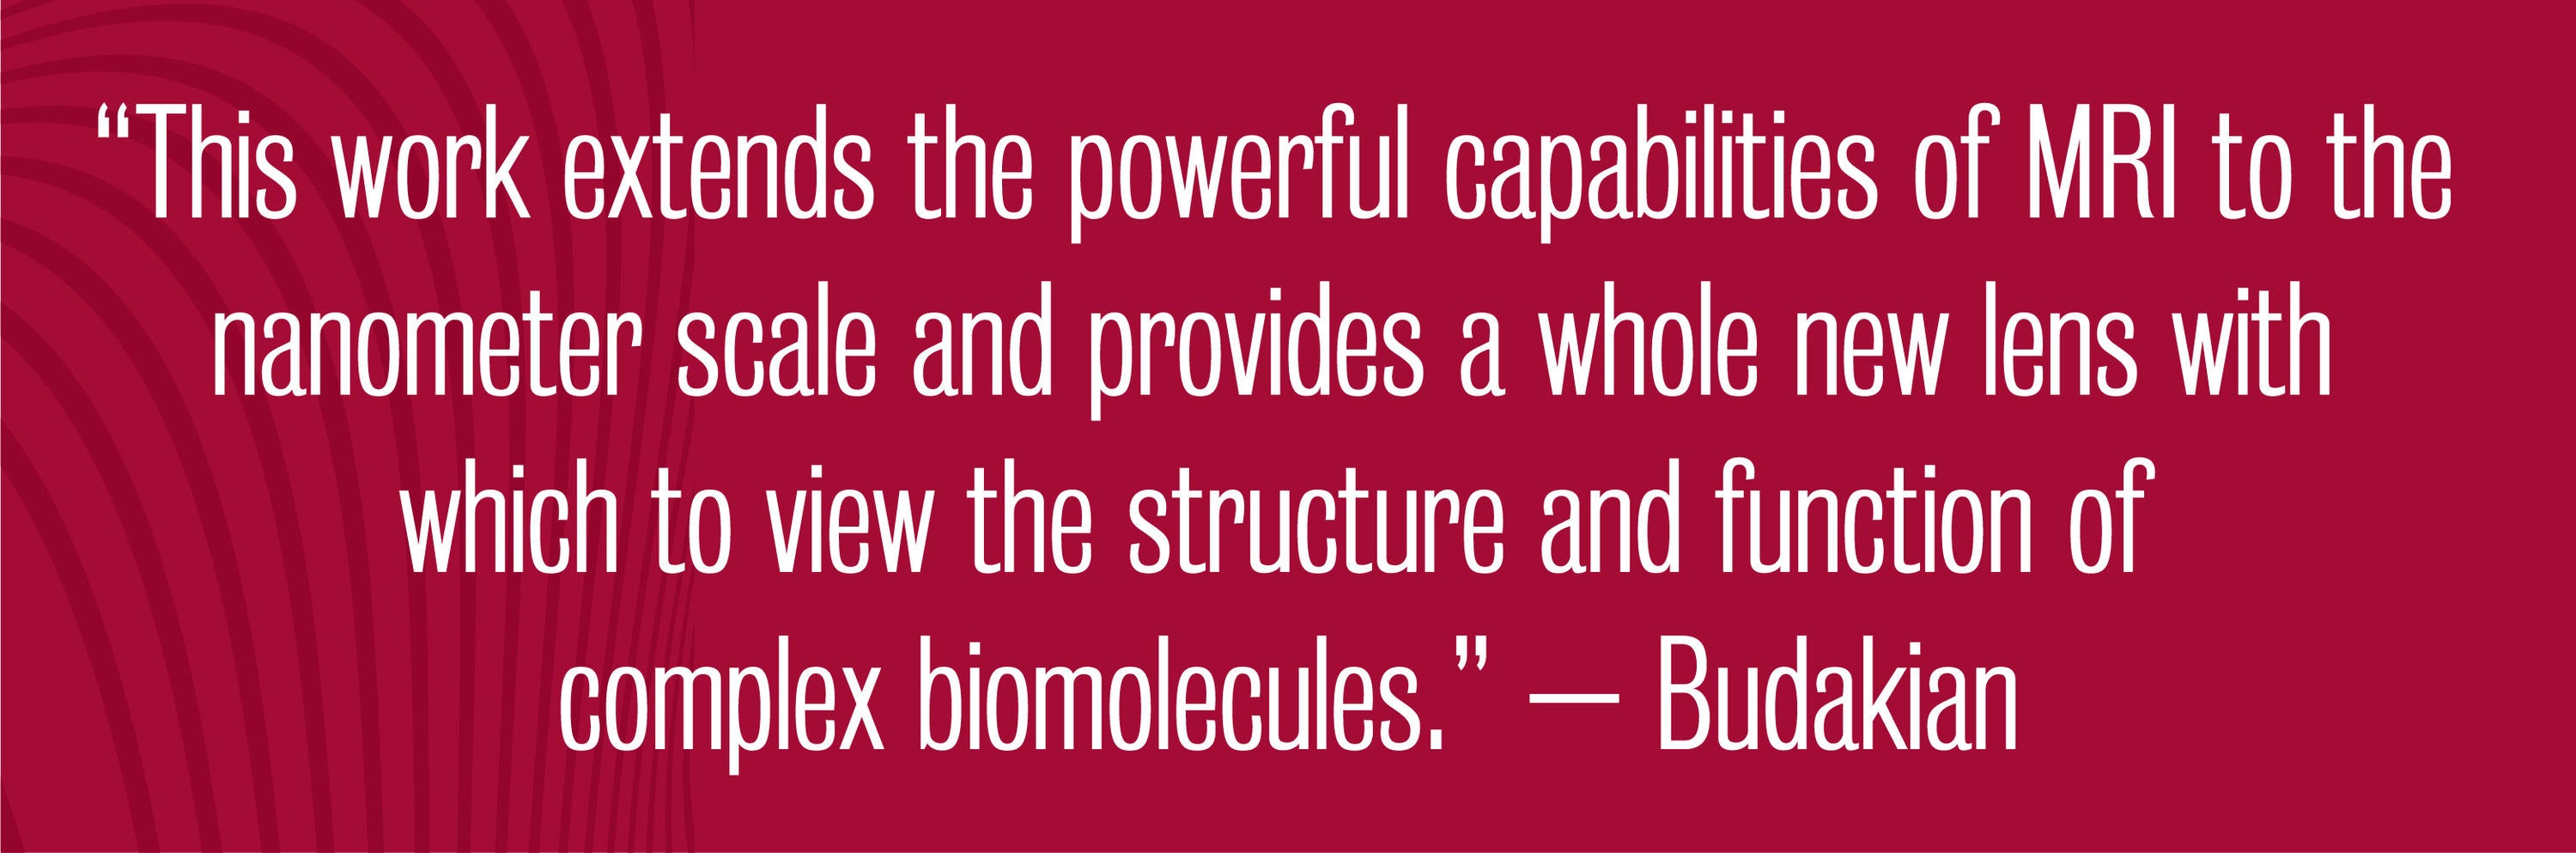 Quote - This work extends the powerful capabilities of MRI to the nanometer scale and provides a whole new lens with which to view the structure and function of complex biomolecules. – Budakian